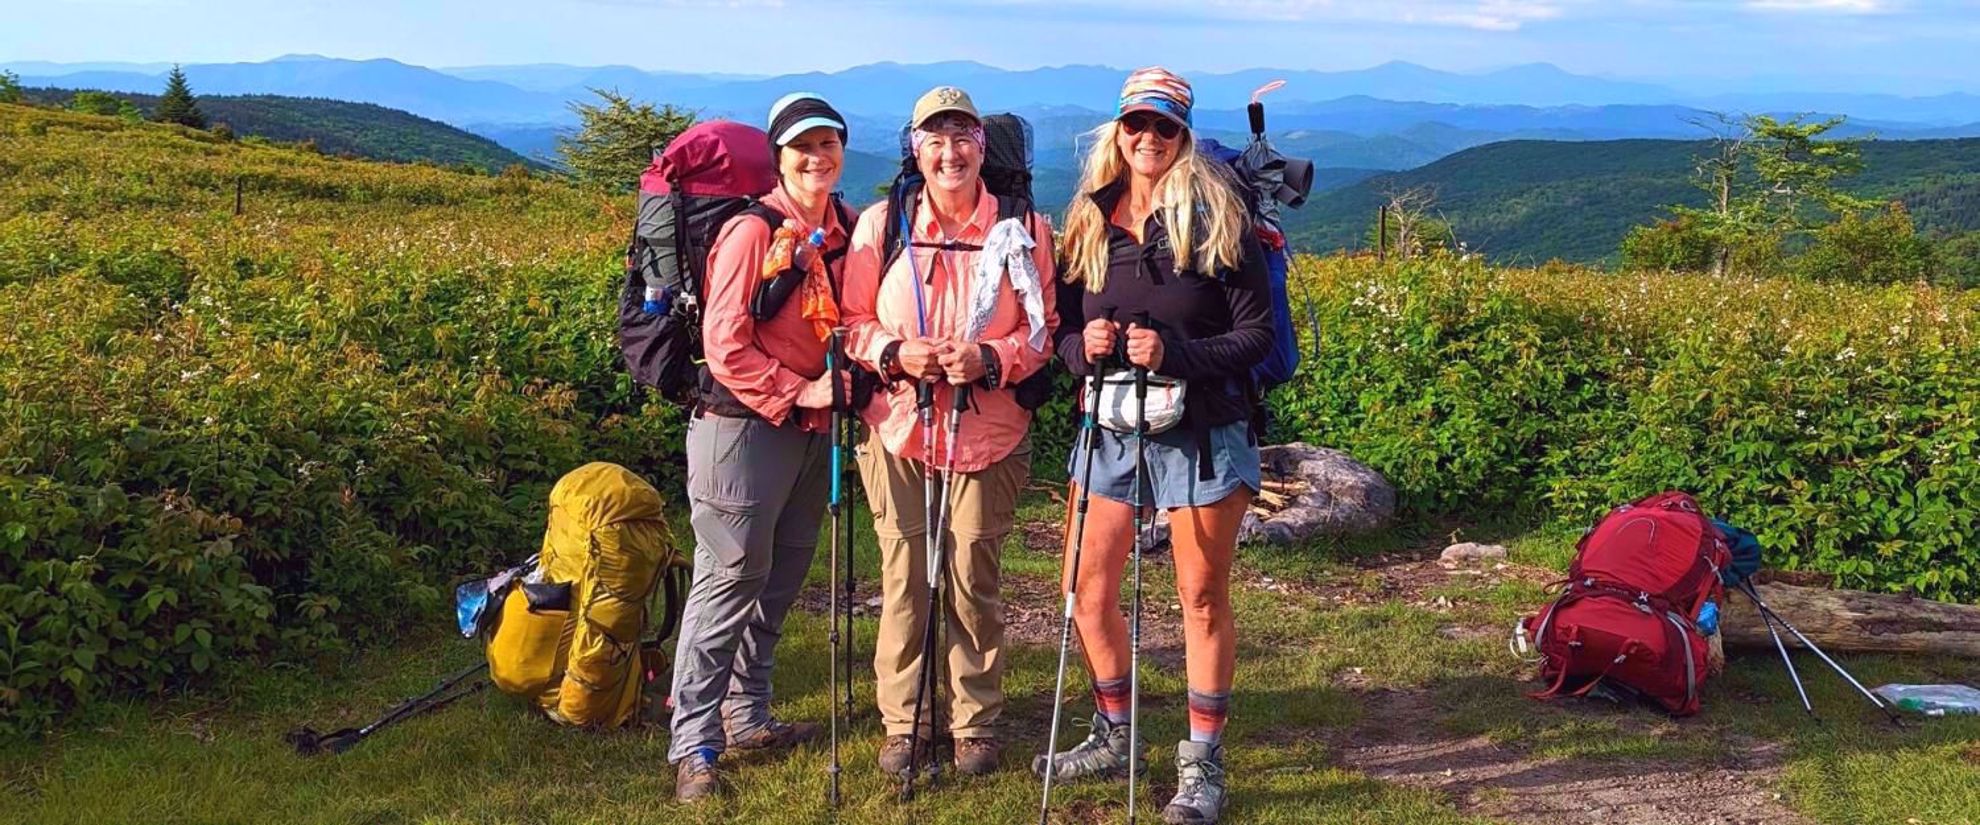 join other women to learn to backpack the AT